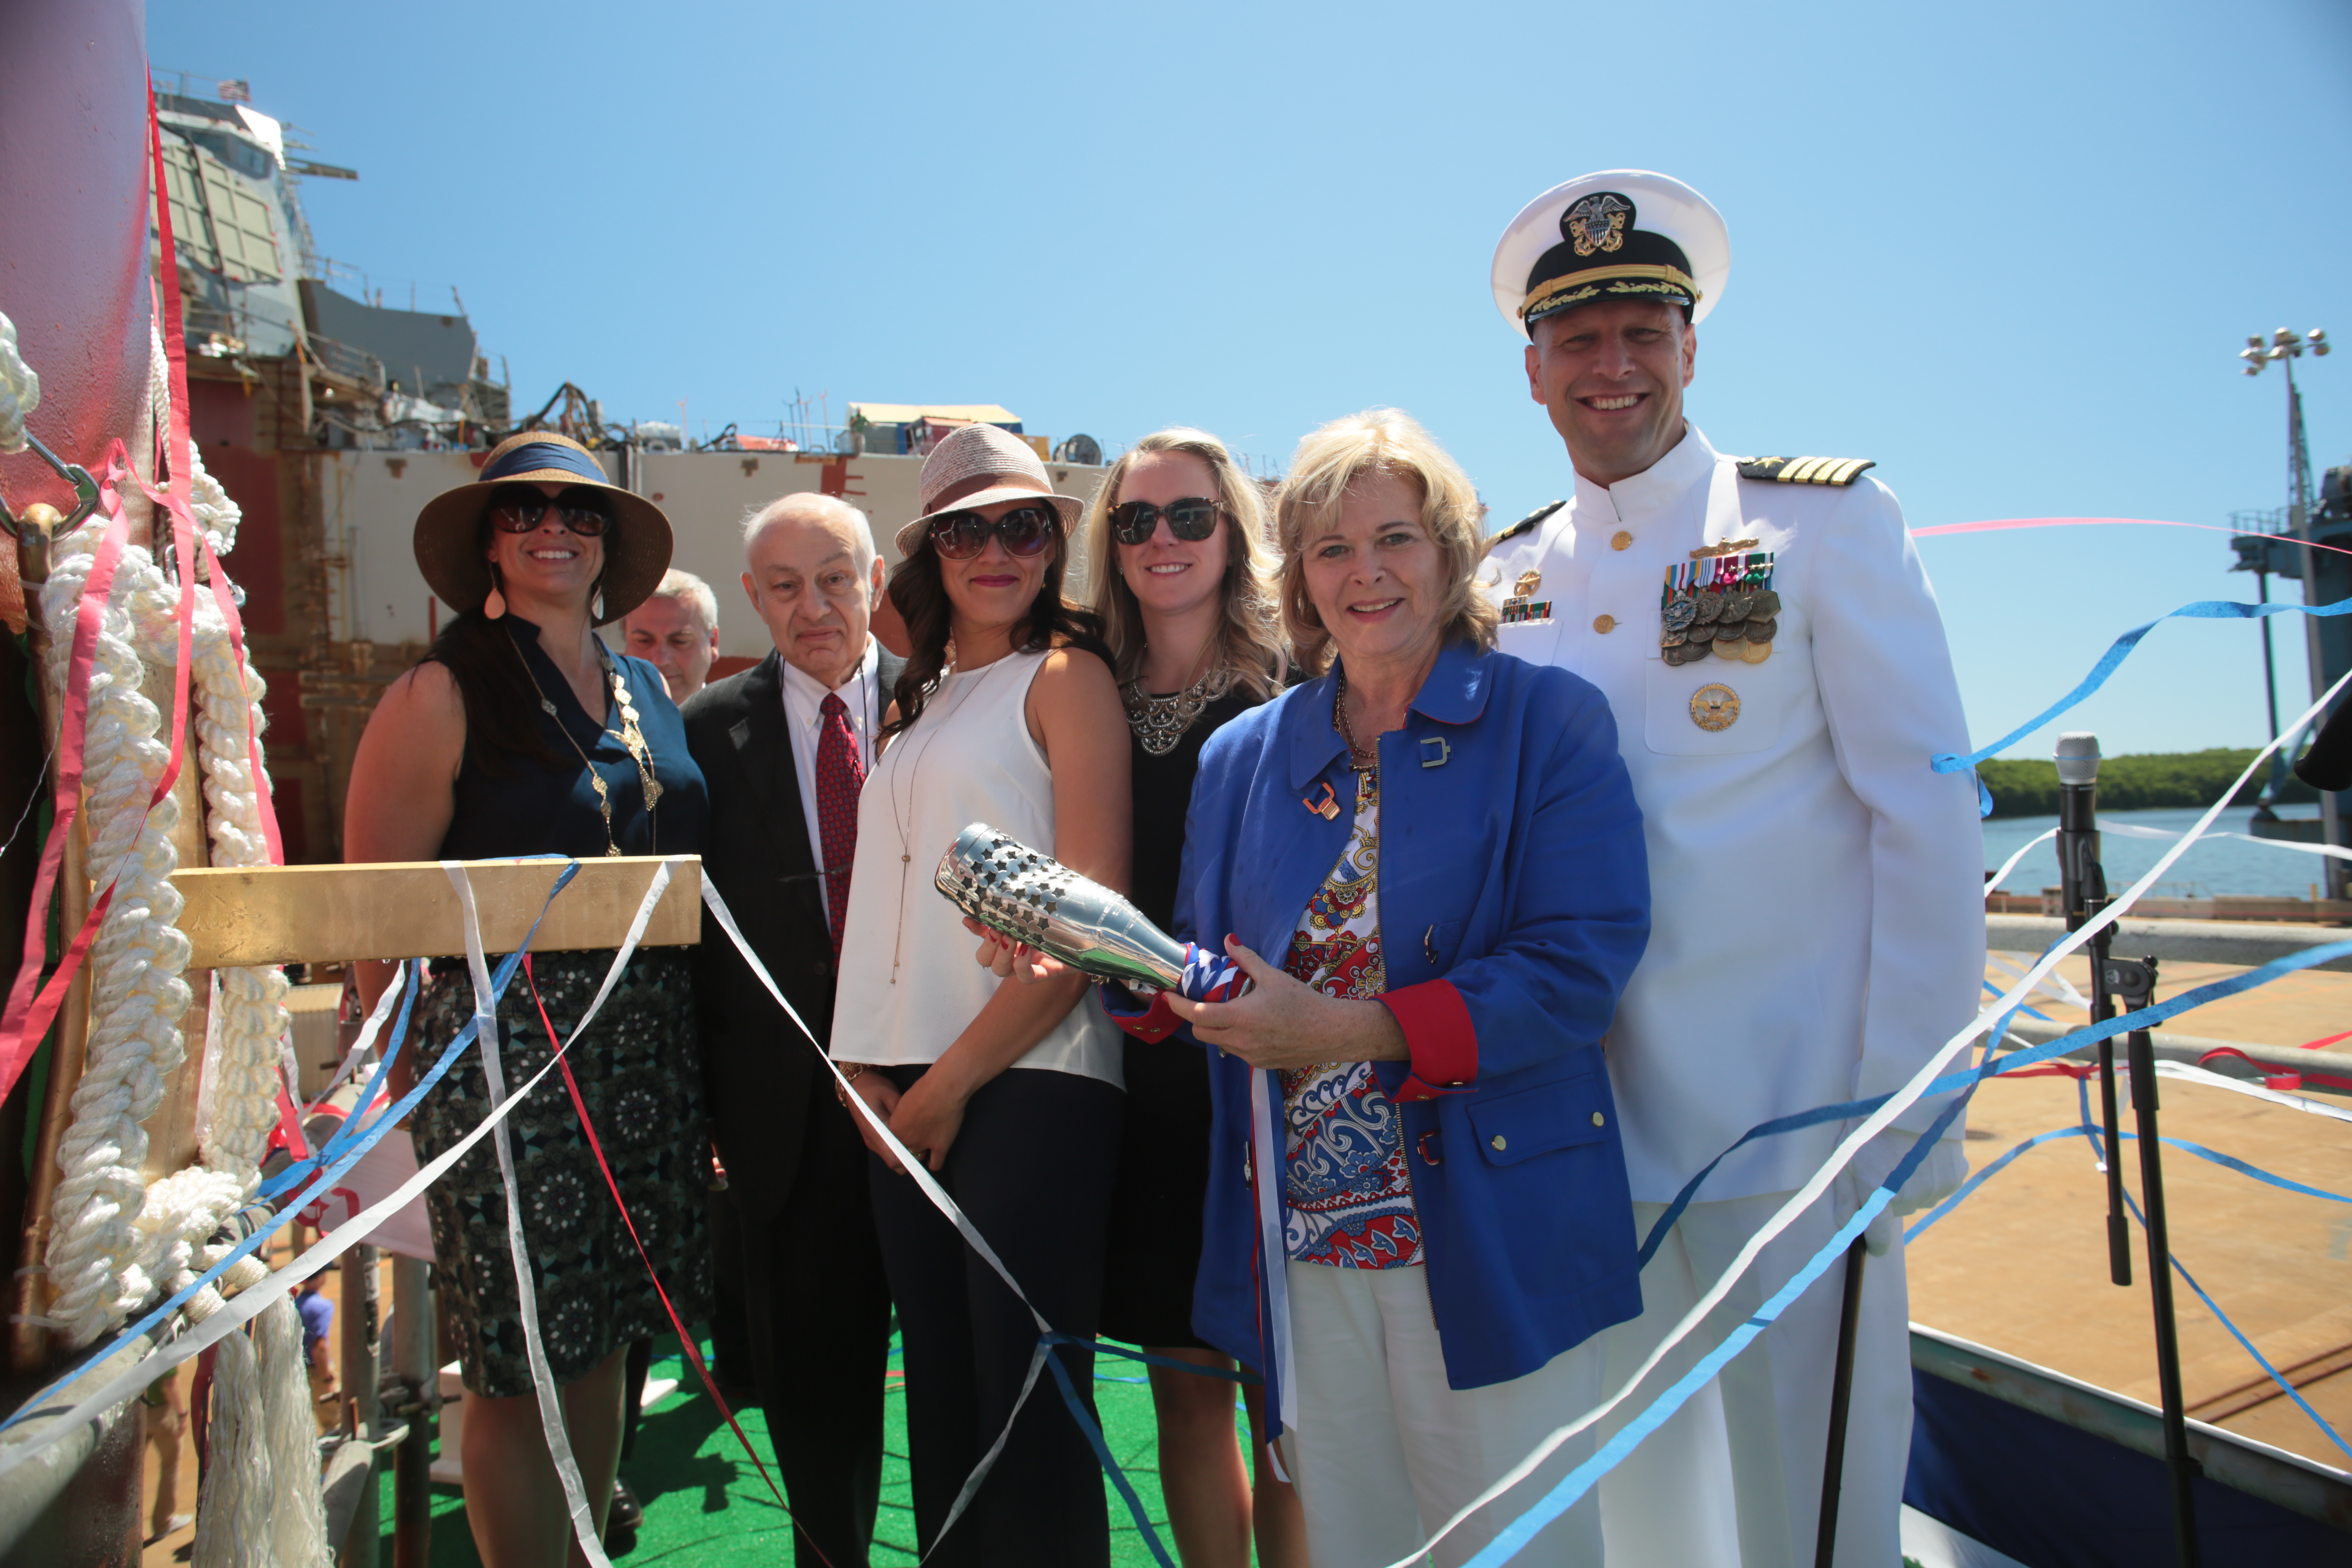 Sally Monsoor, in blue, sponsor of the future USS Michael Monsoor (DDG 1001), holds the christening bottle alongside the ship’s commanding officer, Capt. Scott Smith, her matrons of honor and Fred Harris, president of General Dynamics Bath Iron Works, which built the Zumwalt-class destroyer named in honor of Medal of Honor recipient Navy Petty Officer 2nd Class (SEAL) Michael A. Monsoor. US Navy photo.